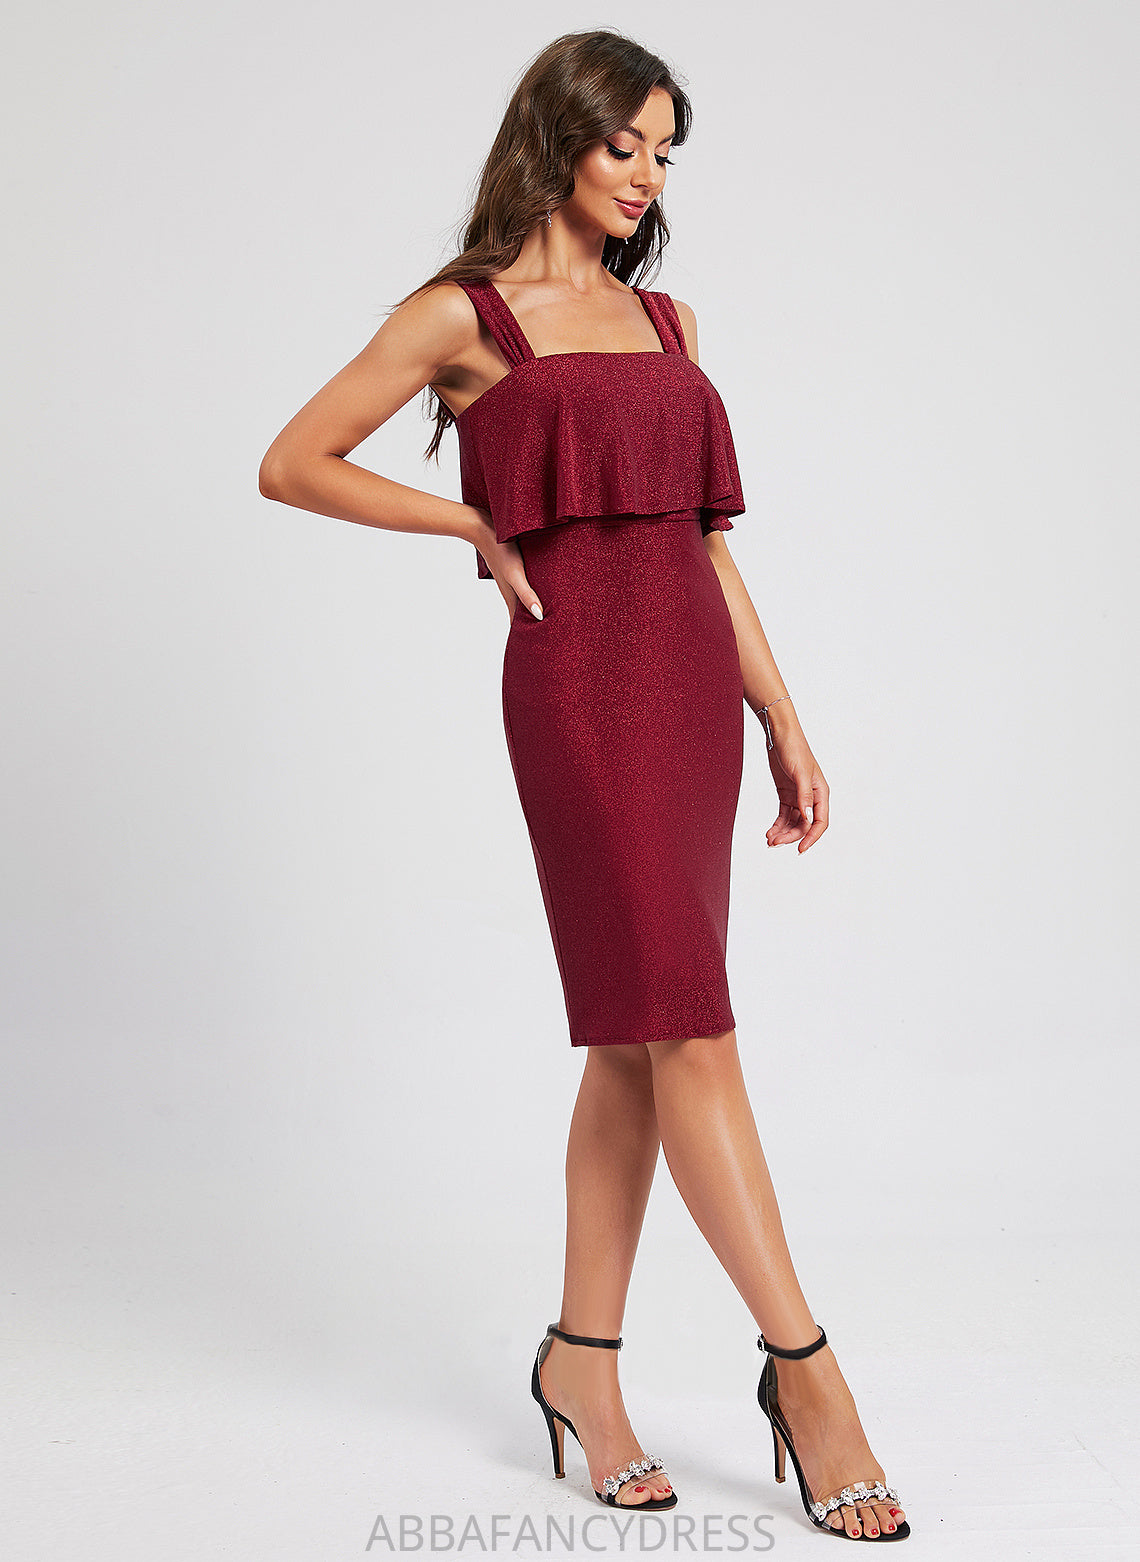 With Cocktail Cocktail Dresses Knee-Length Clare Sheath/Column Dress Polyester Square Ruffle Neckline